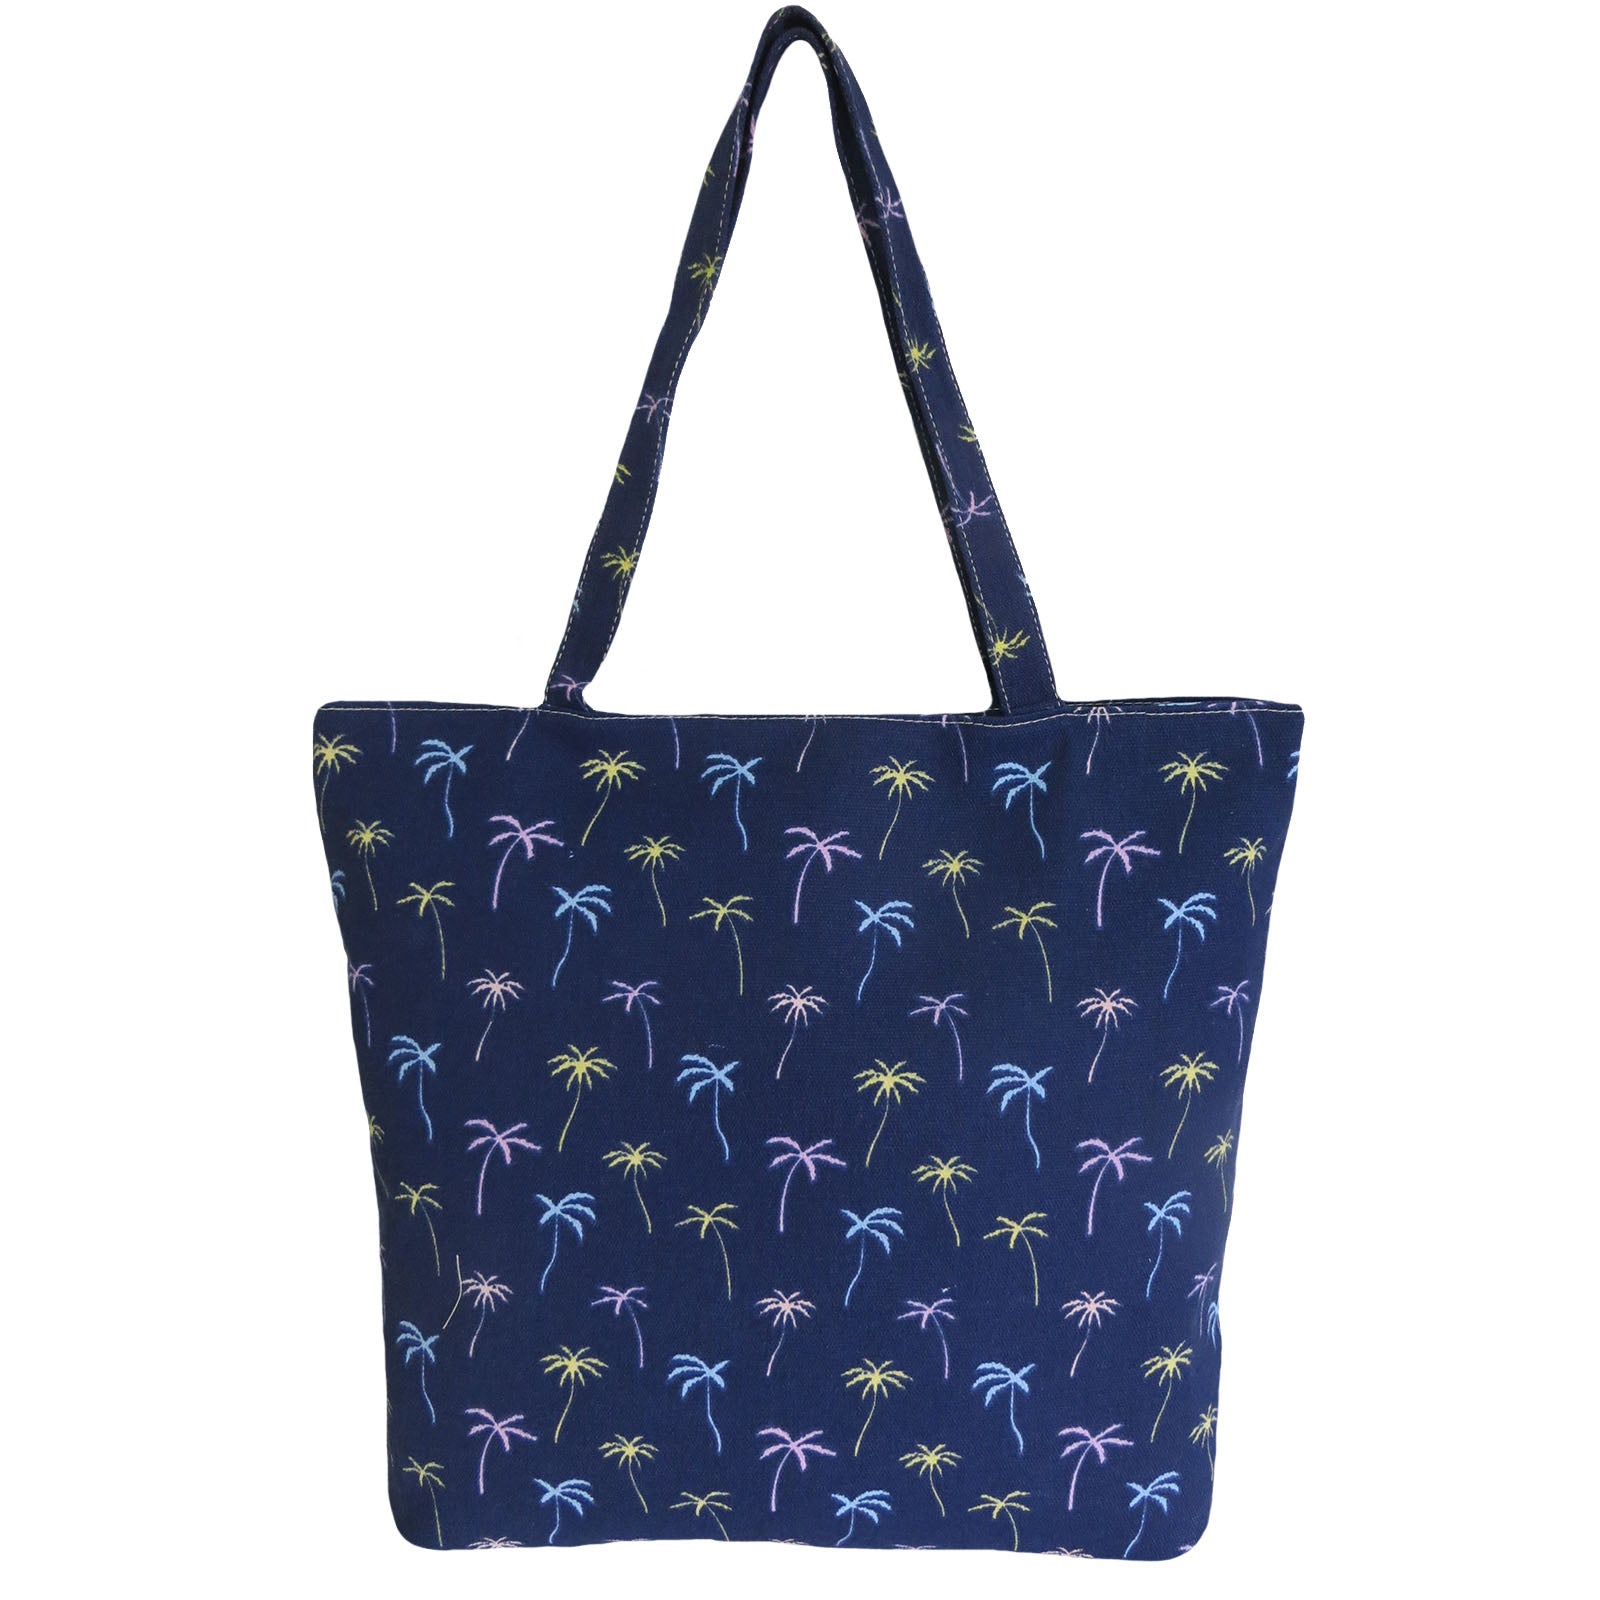 Tropical Wholesale Beach Tote with Palm Tree Design - Alessa Palm in Navy Blue